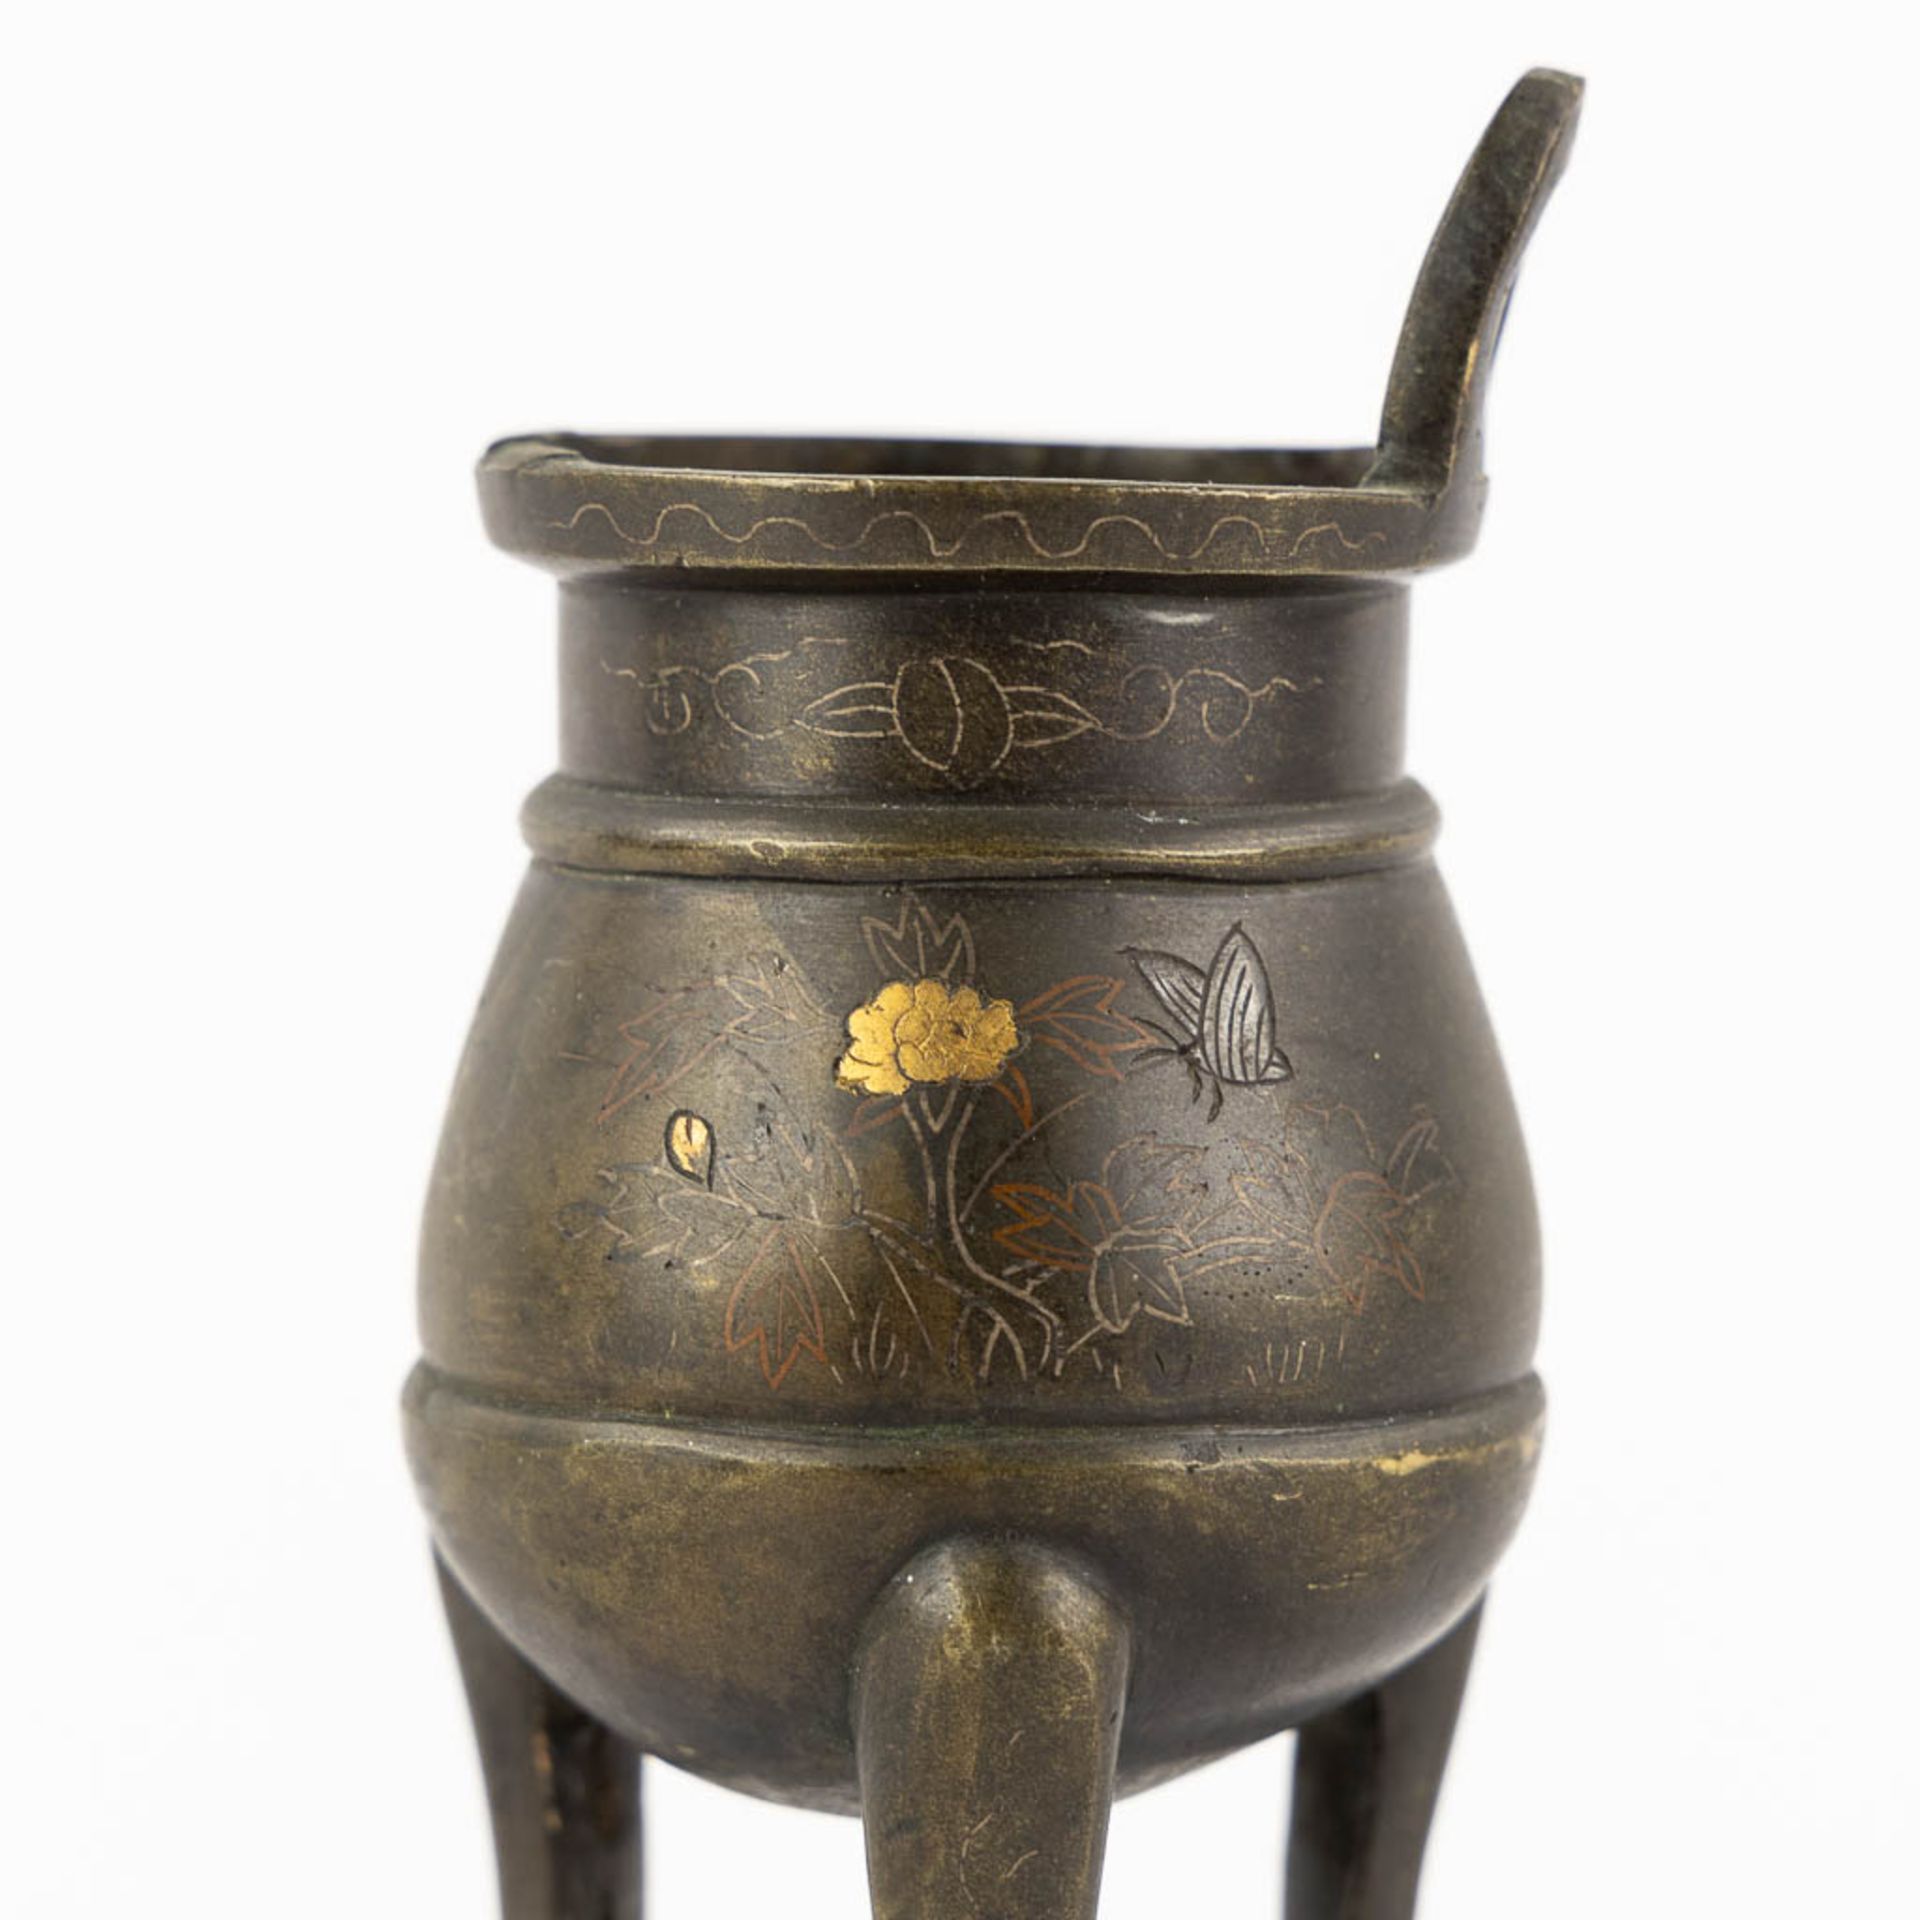 A Chinese insence burner, vase and a lucky coin. Bronze. (H:19 x D:5 cm) - Bild 16 aus 19